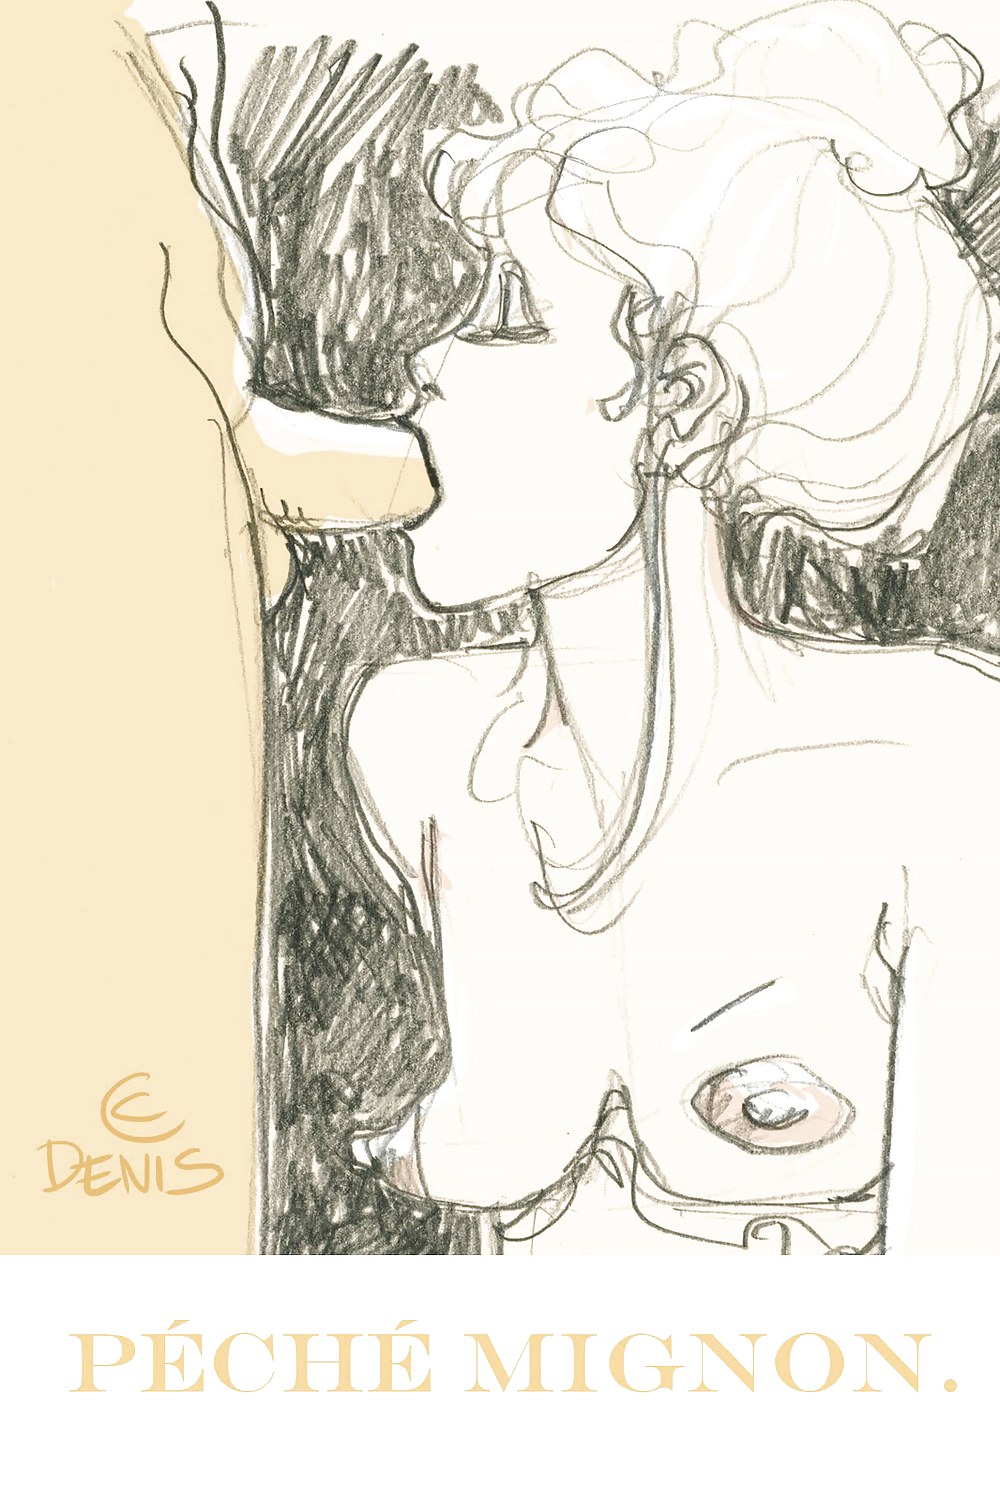 Erotic Illustration by Denis - for Weinfan #15099855